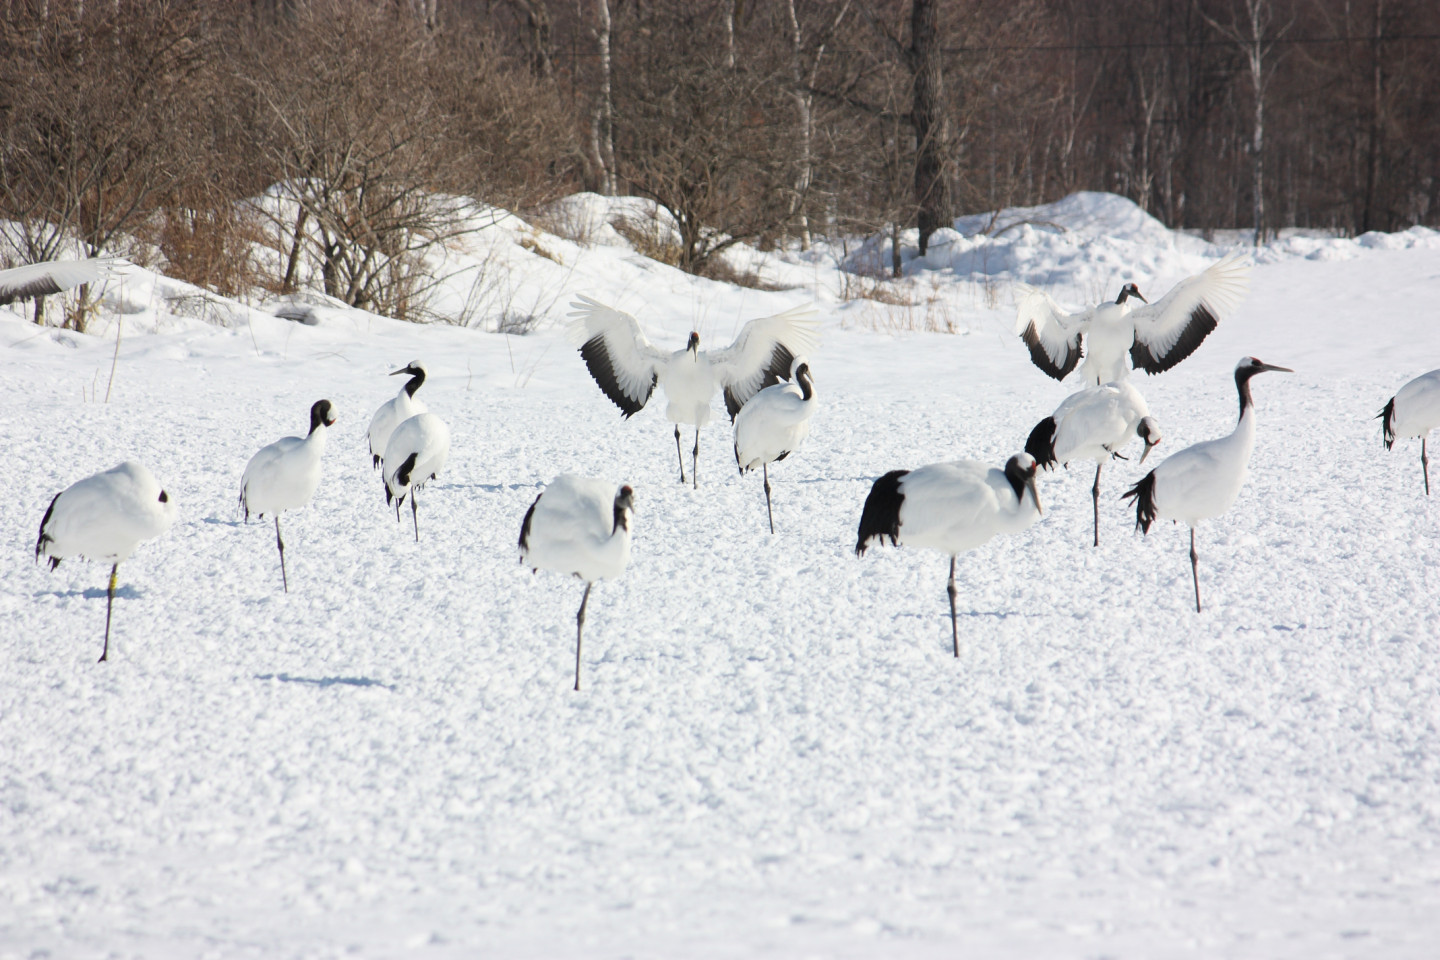 Let's go to Hokkaido in Winter and See Cute Animals!